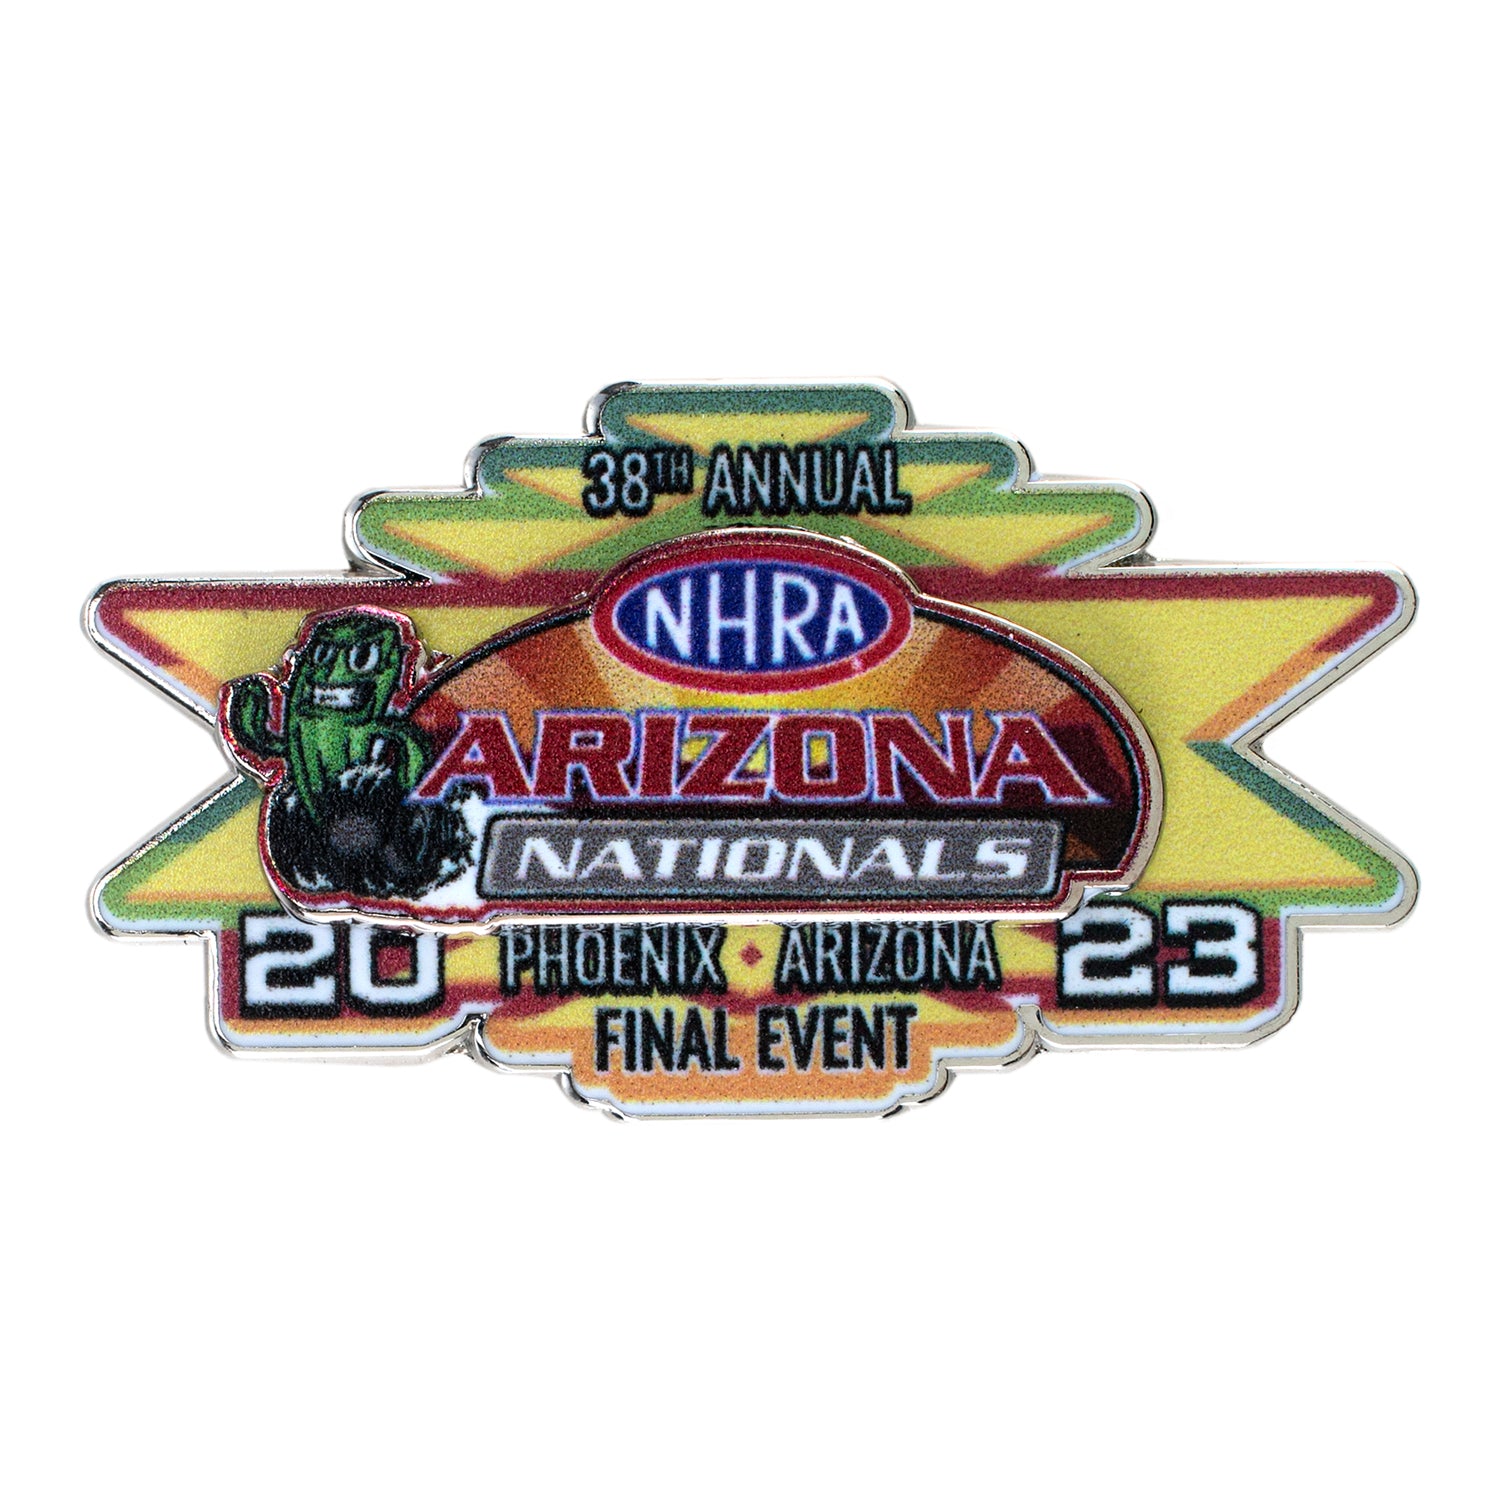 Image of NHRA Arizona Nationals Limited Edition Event Hatpin